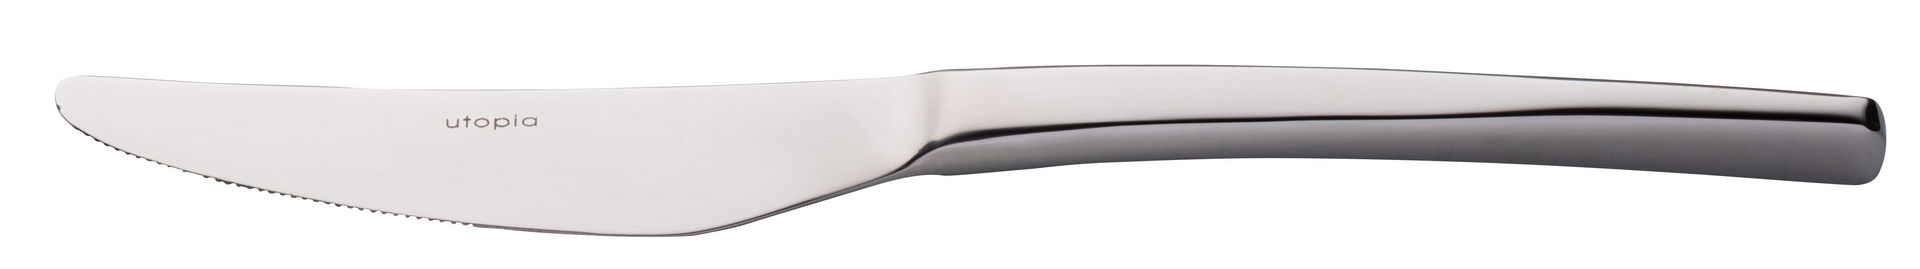 Axis Table Knife - F10402-000000-B01012 (Pack of 12)